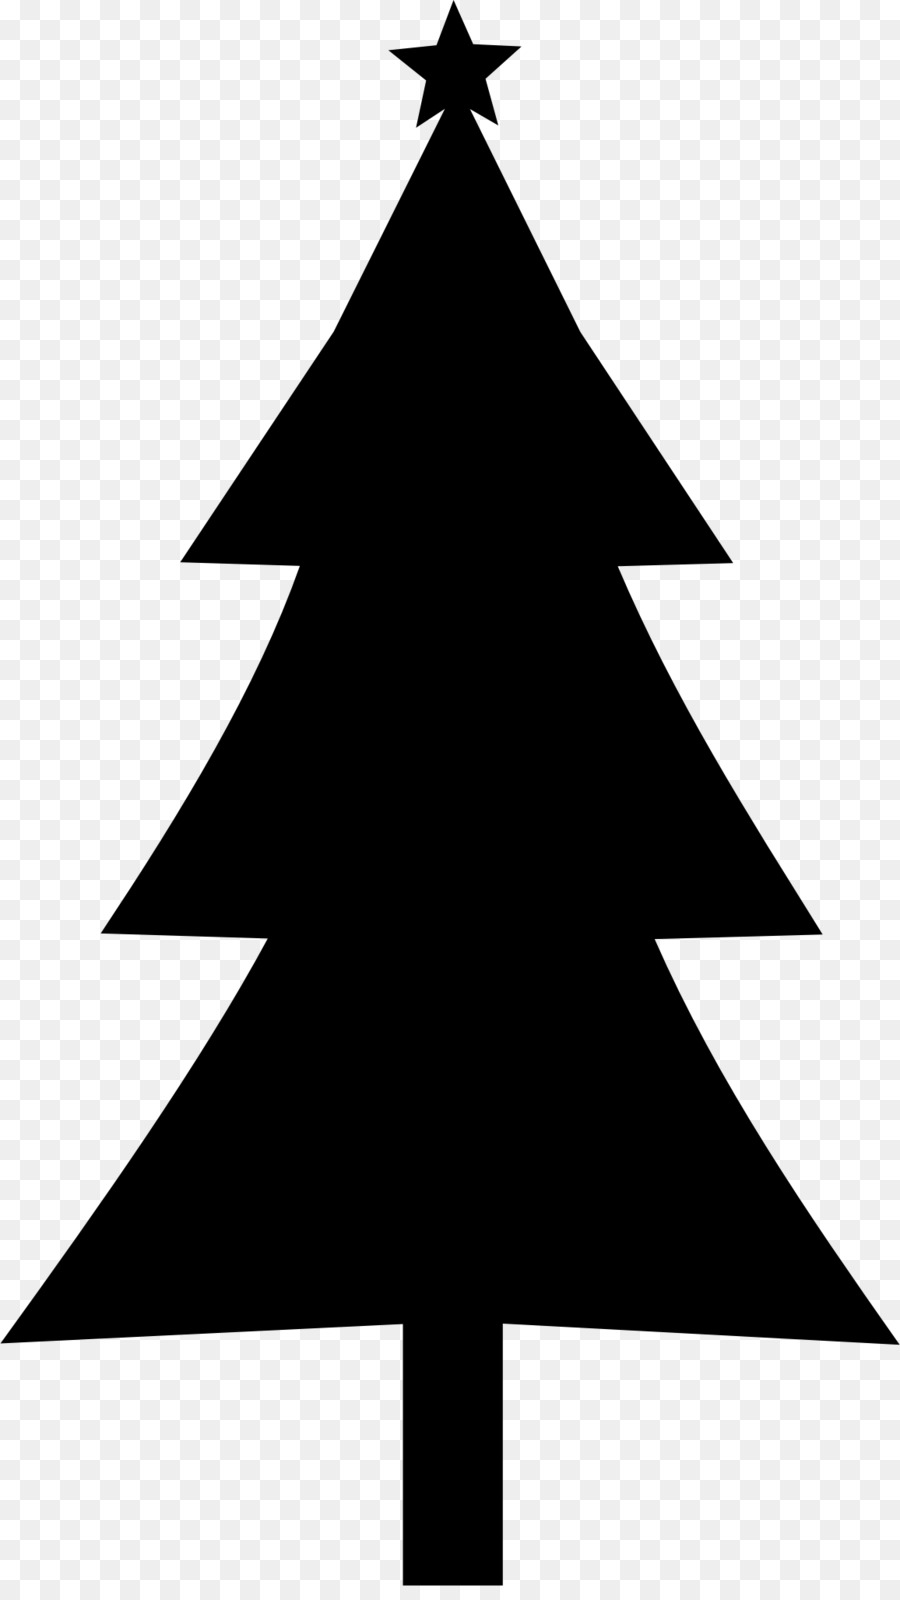 Christmas tree Silhouette Clip art - fir-tree png download - 1156*2037 - Free Transparent Christmas  png Download.